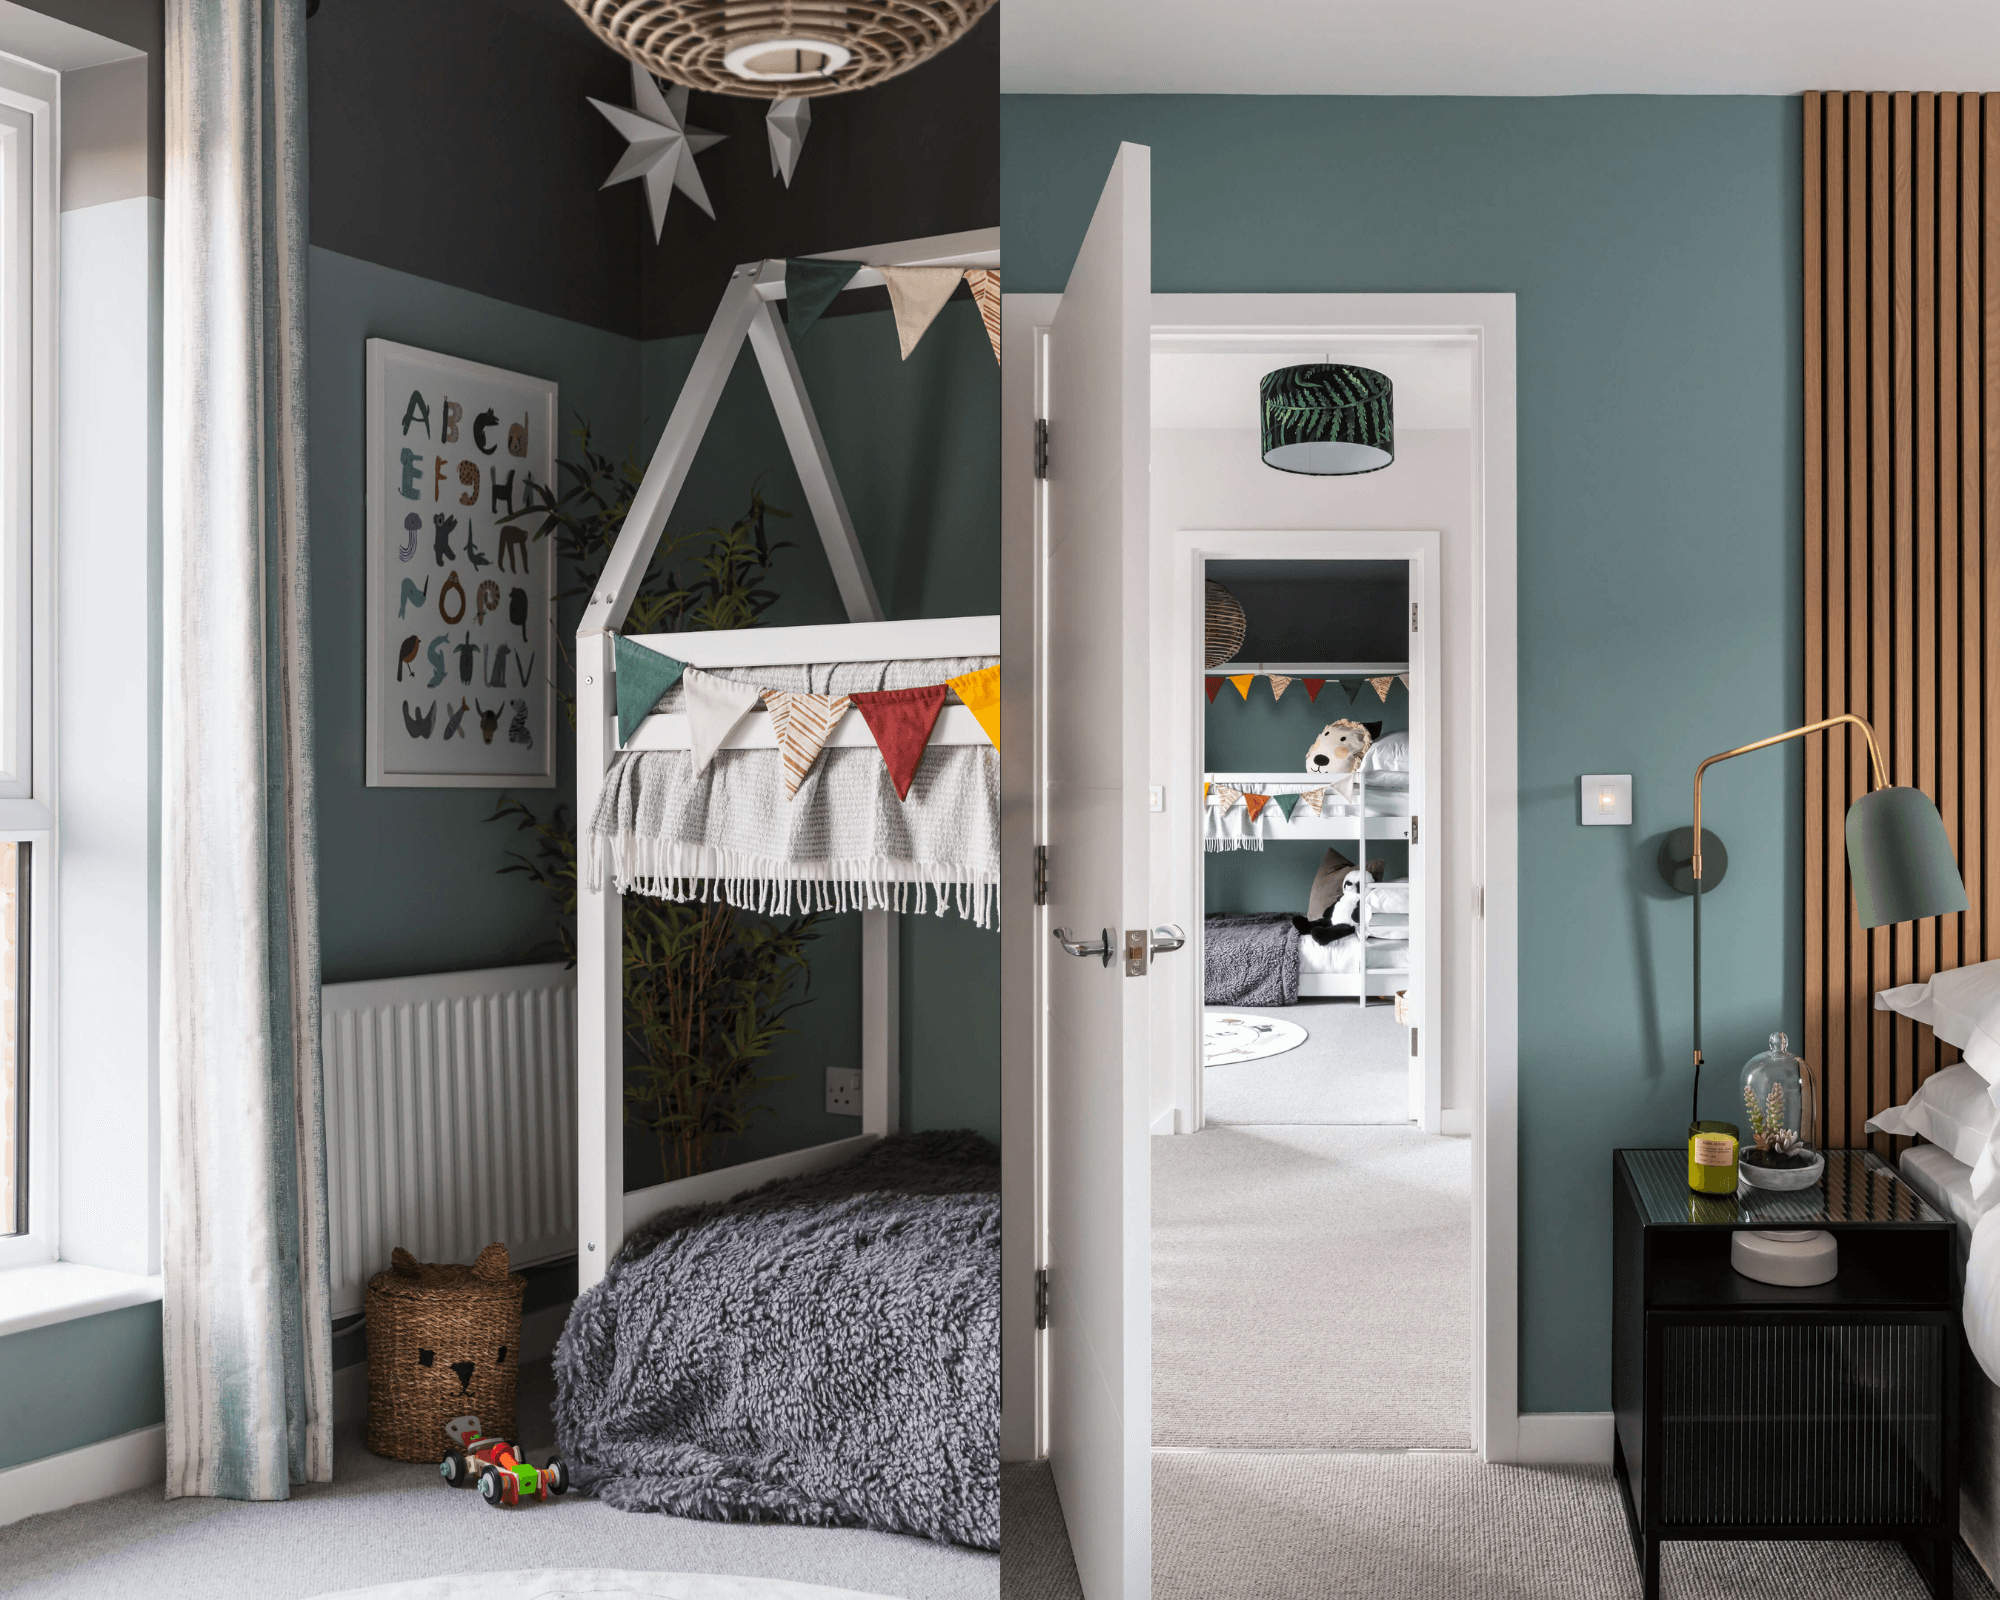 Children's bedroom with bunk bed and bunting